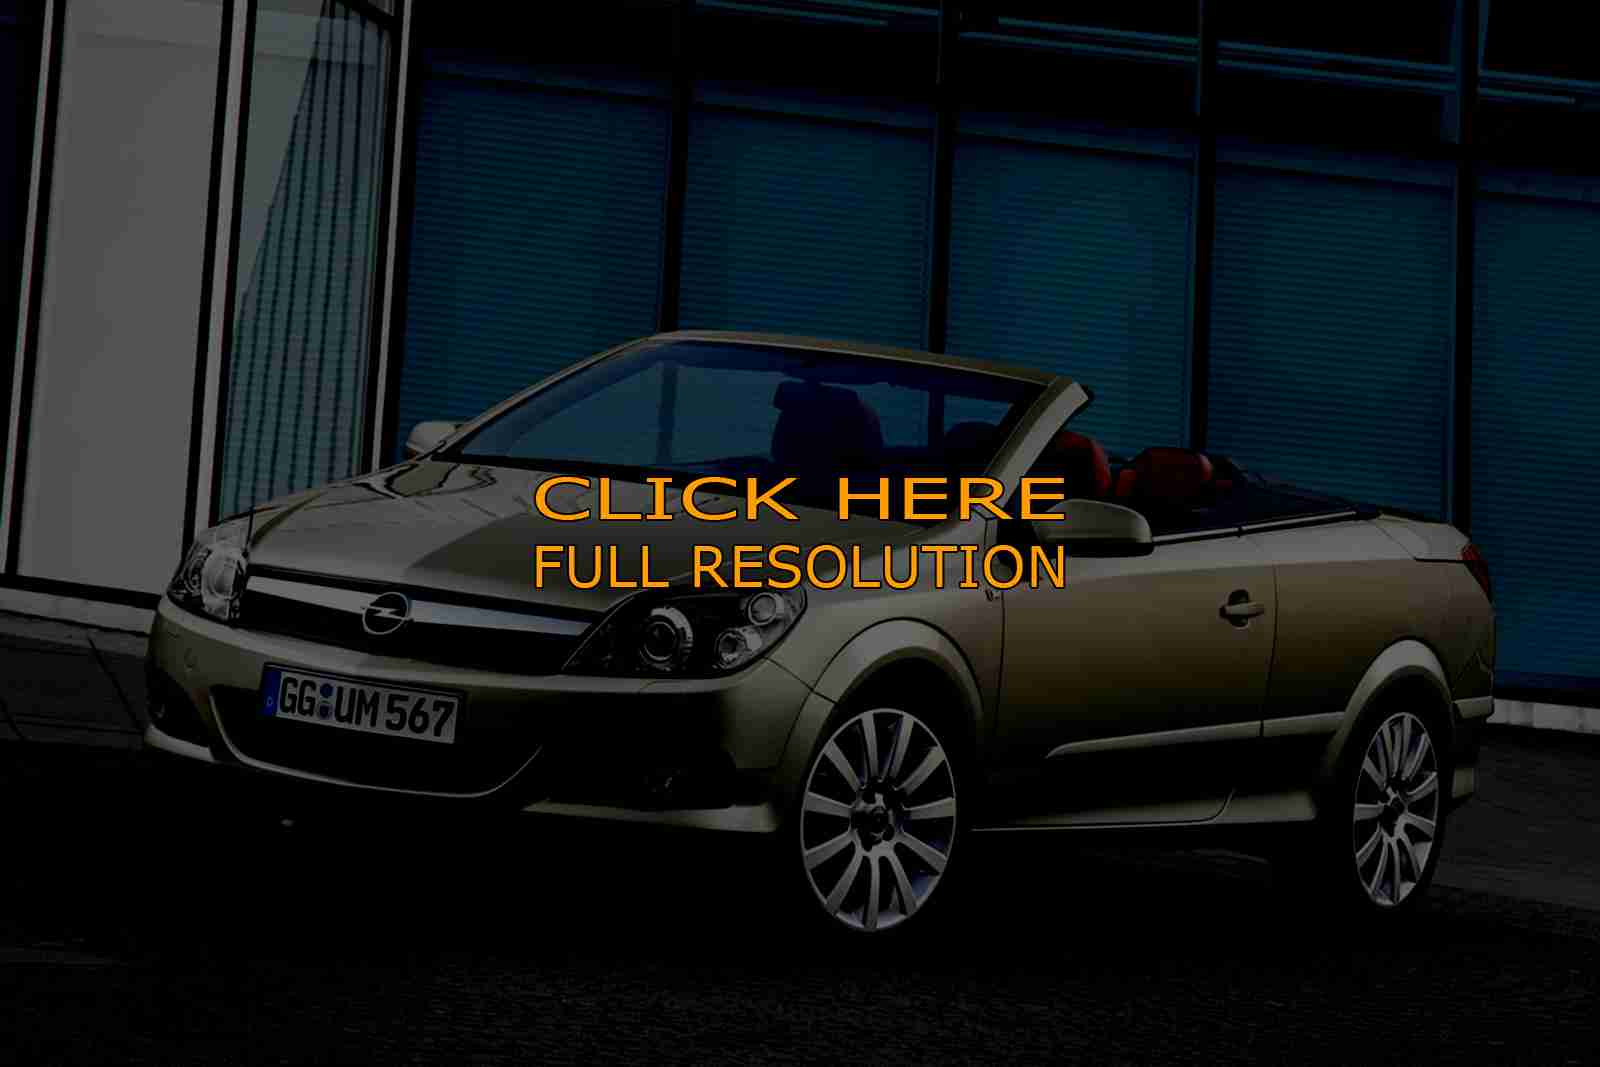 Opel Astra Cabriolet. This is why they've just announced that by 2013 they